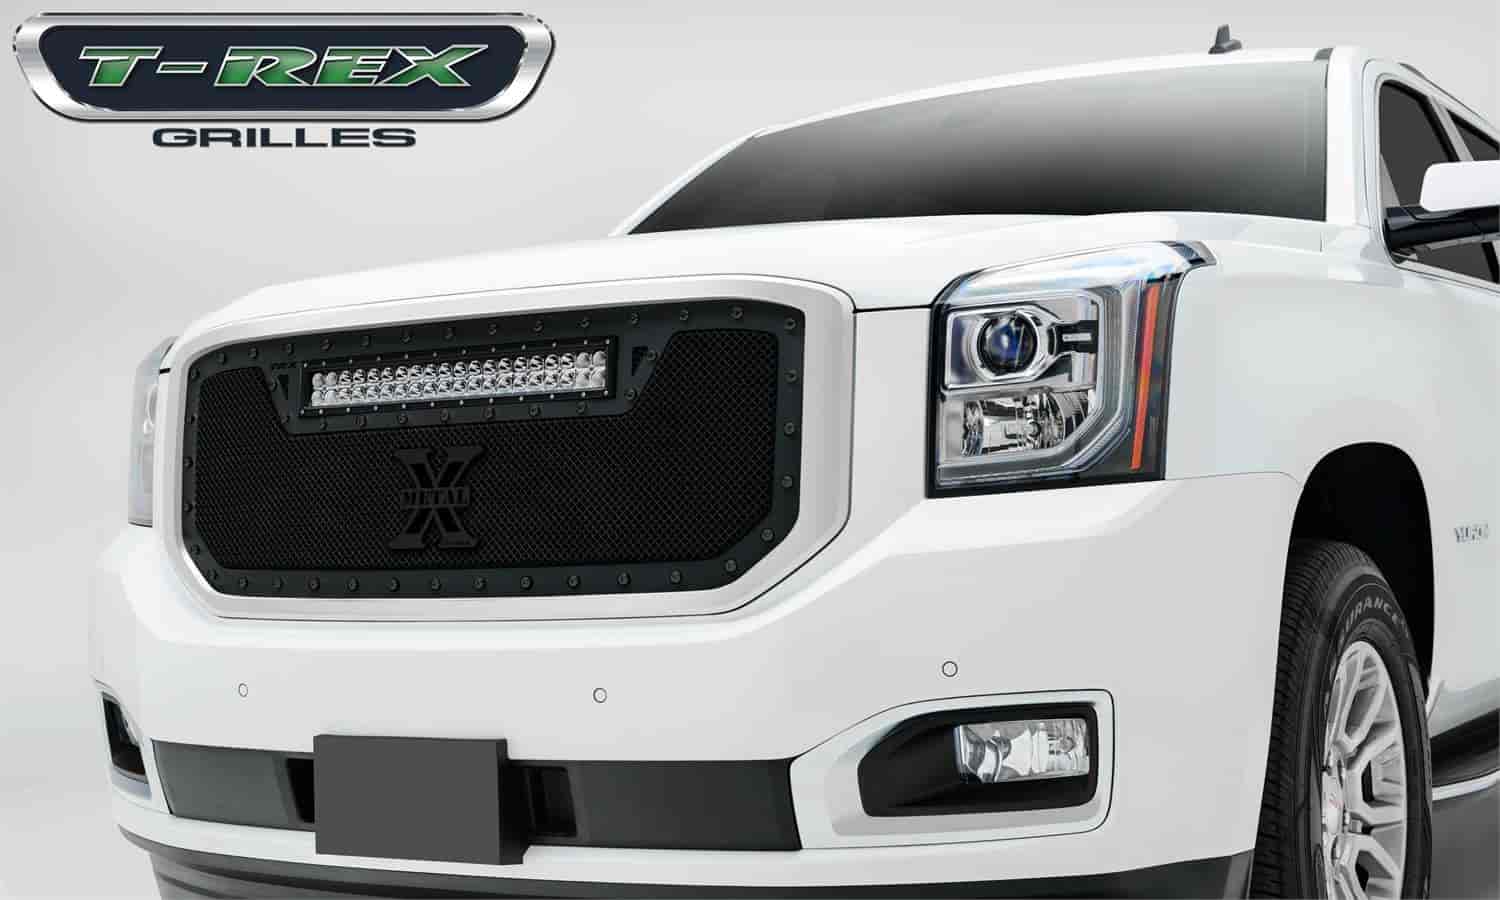 TORCH Series LED Light Grille 1 - 20 LED Bar Formed Mesh Grille Main Insert 1 Pc Black Powdercoated